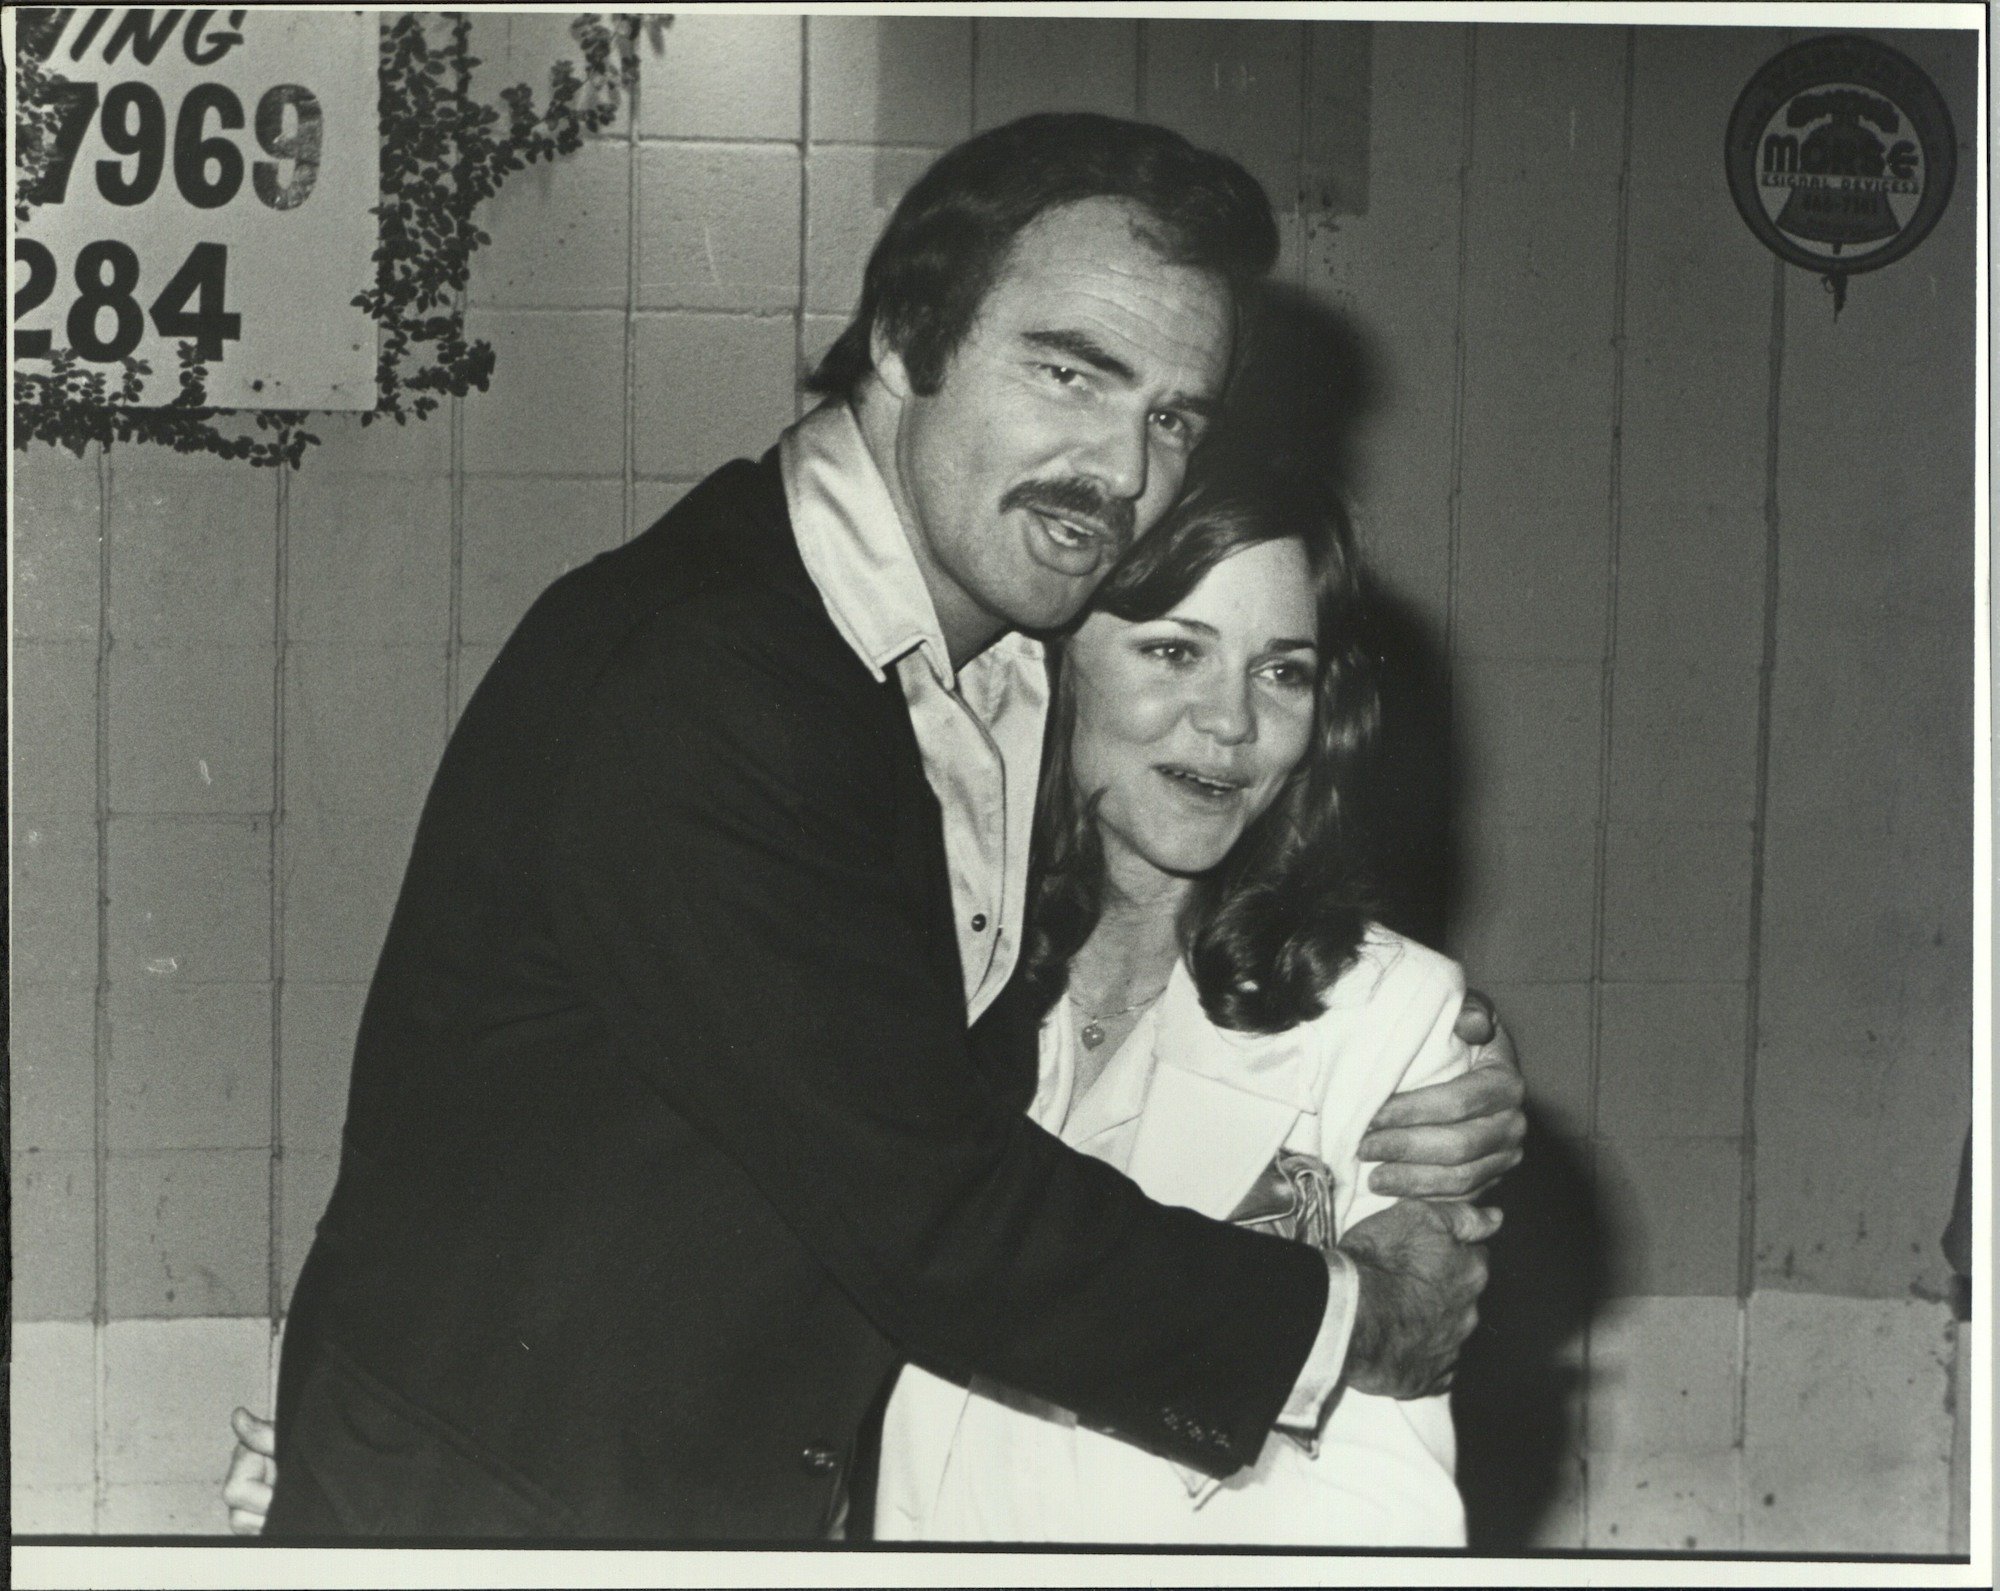 (L-R) Burt Reynolds and Sally Field embracing, in black and white